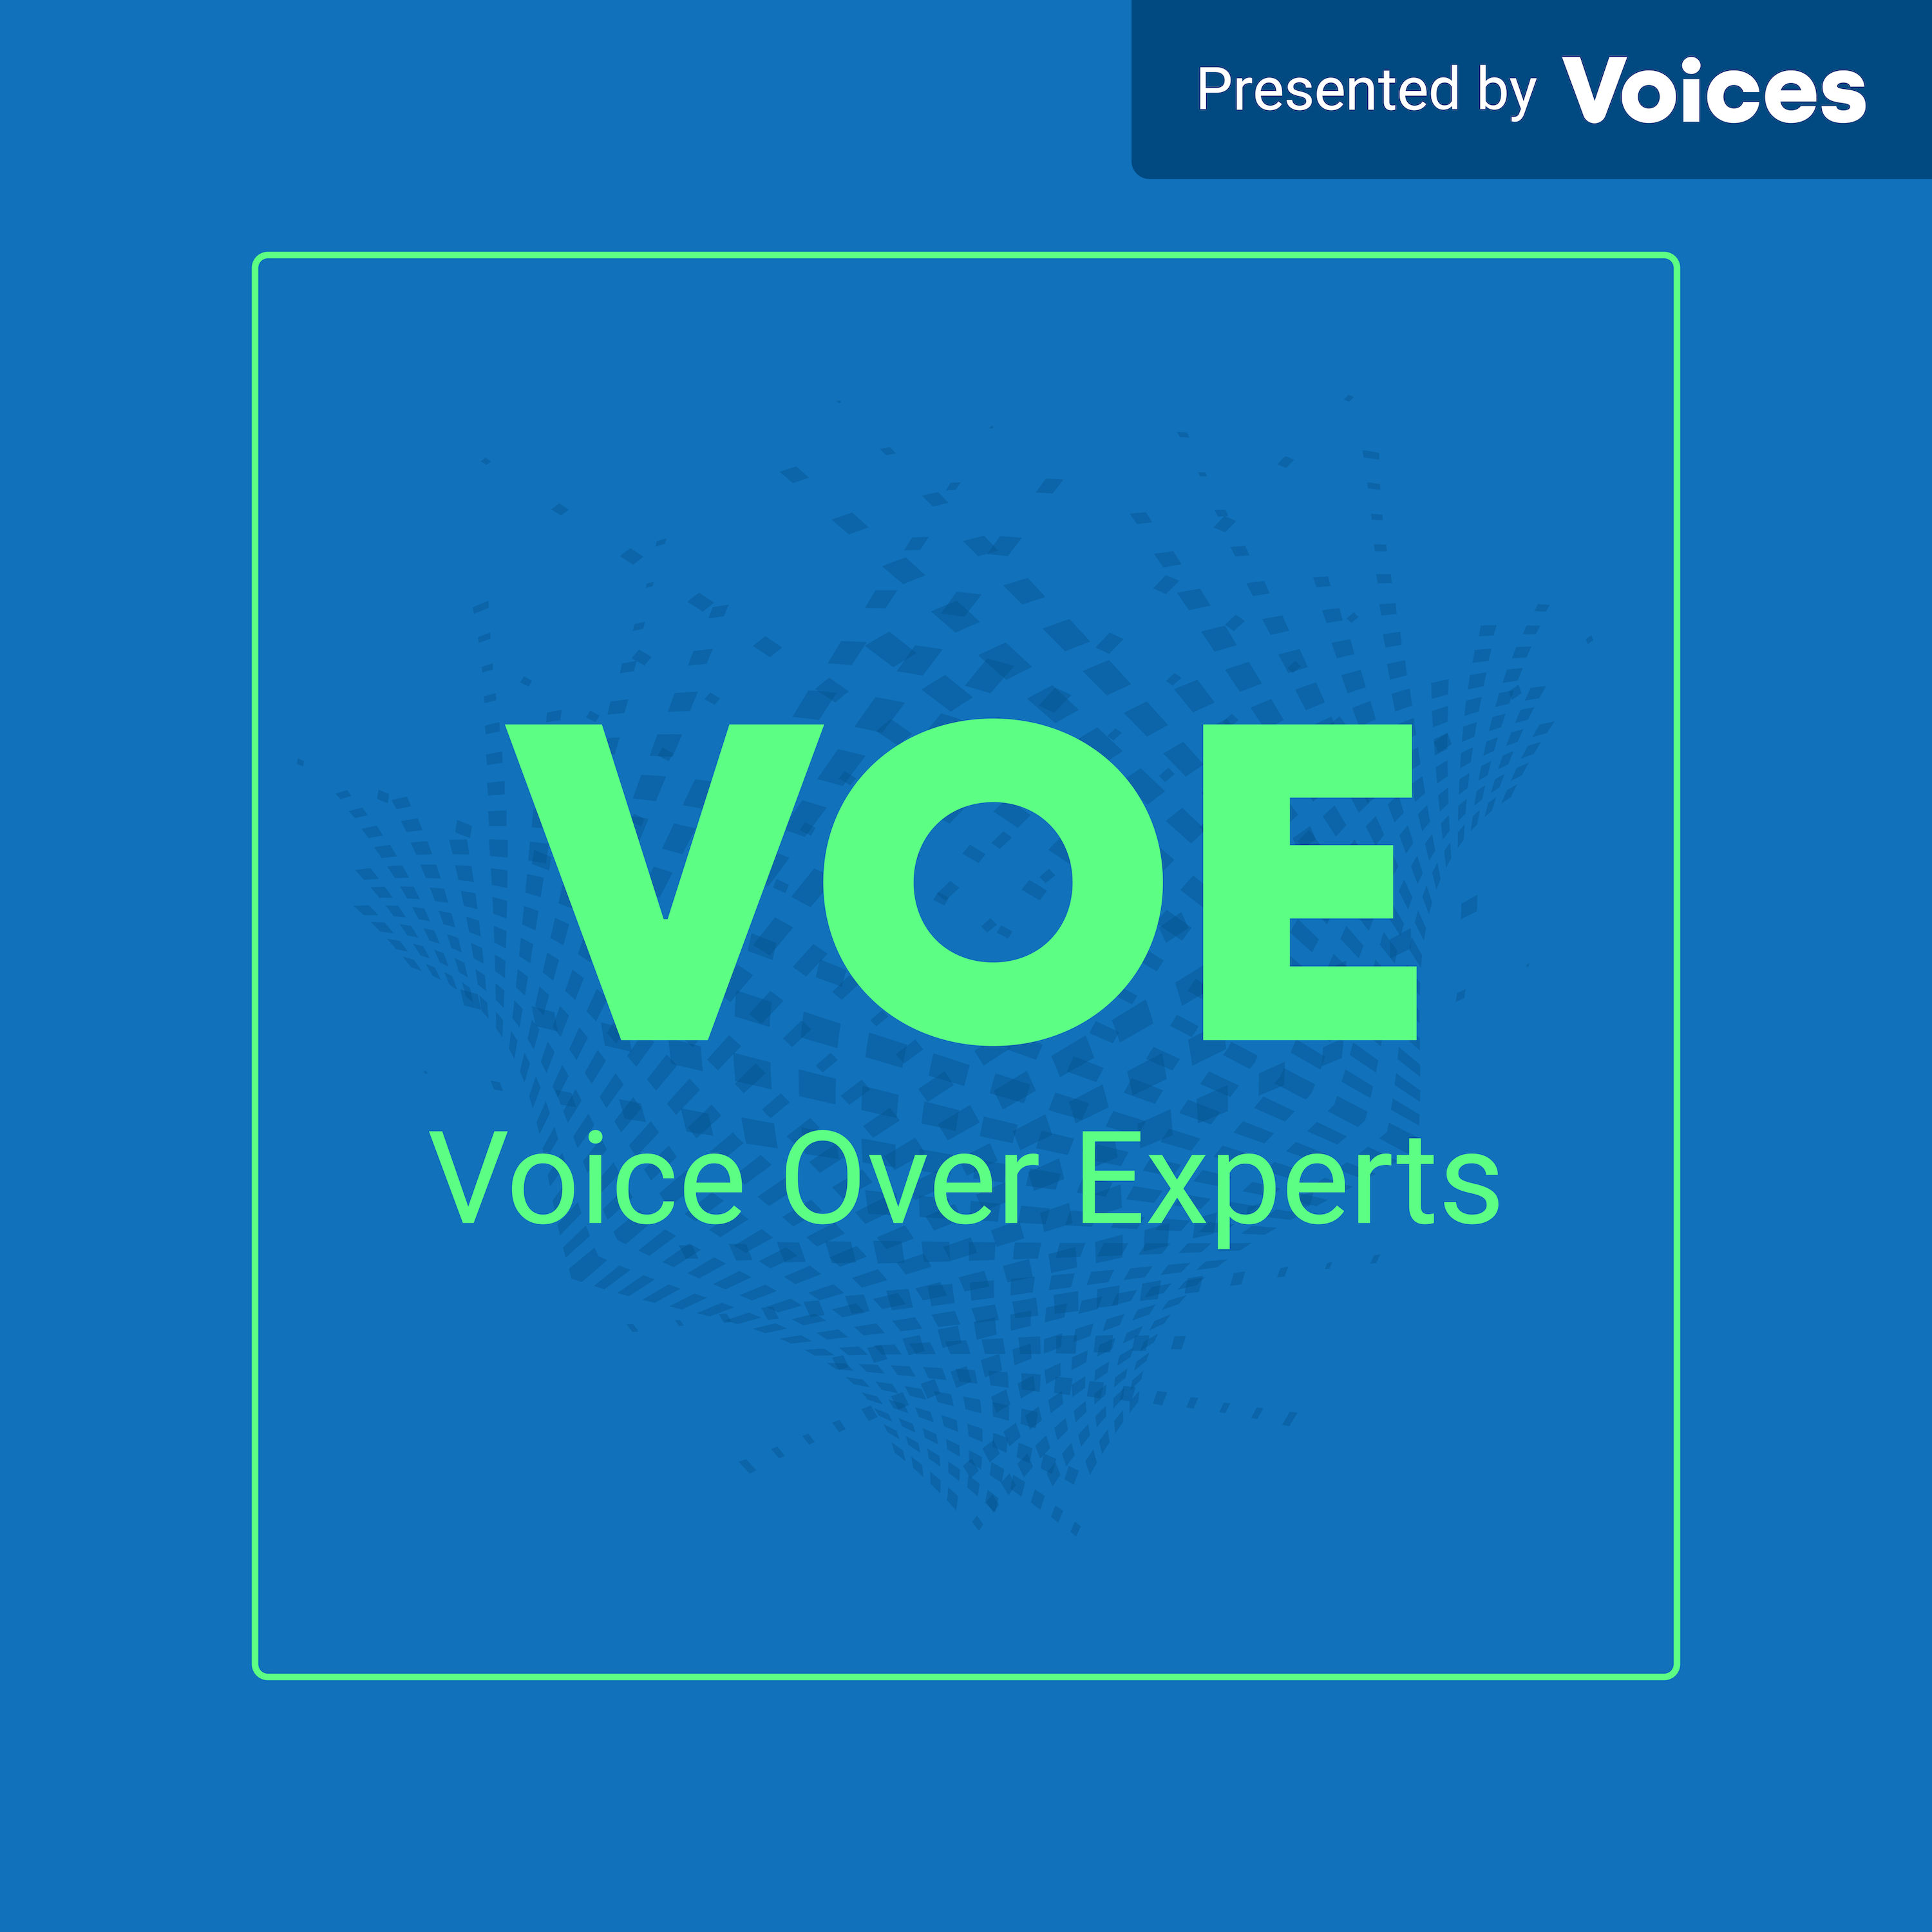 Voices.com Podcast - Voice Over Experts